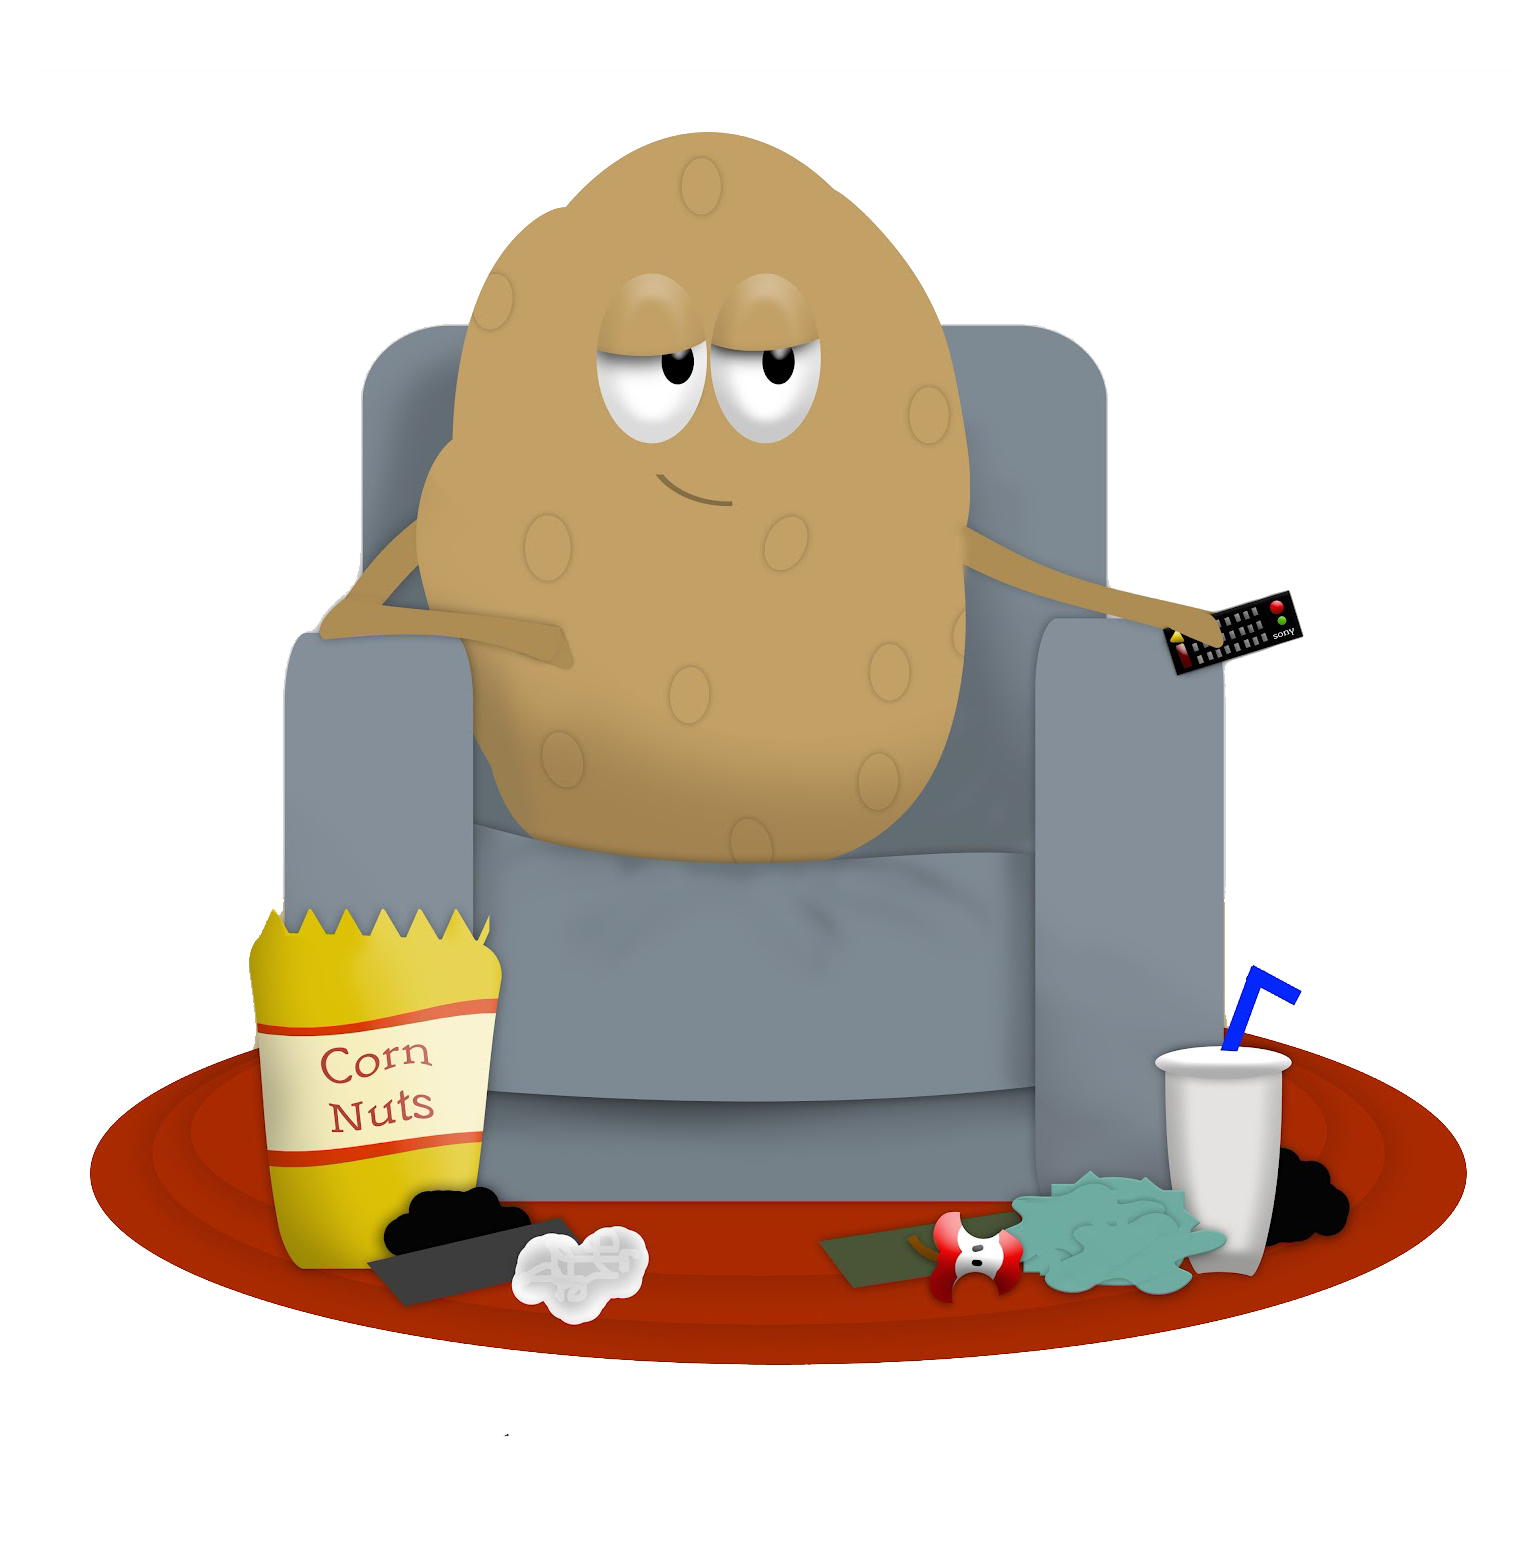 Collection of Couch Potato PNG HD.